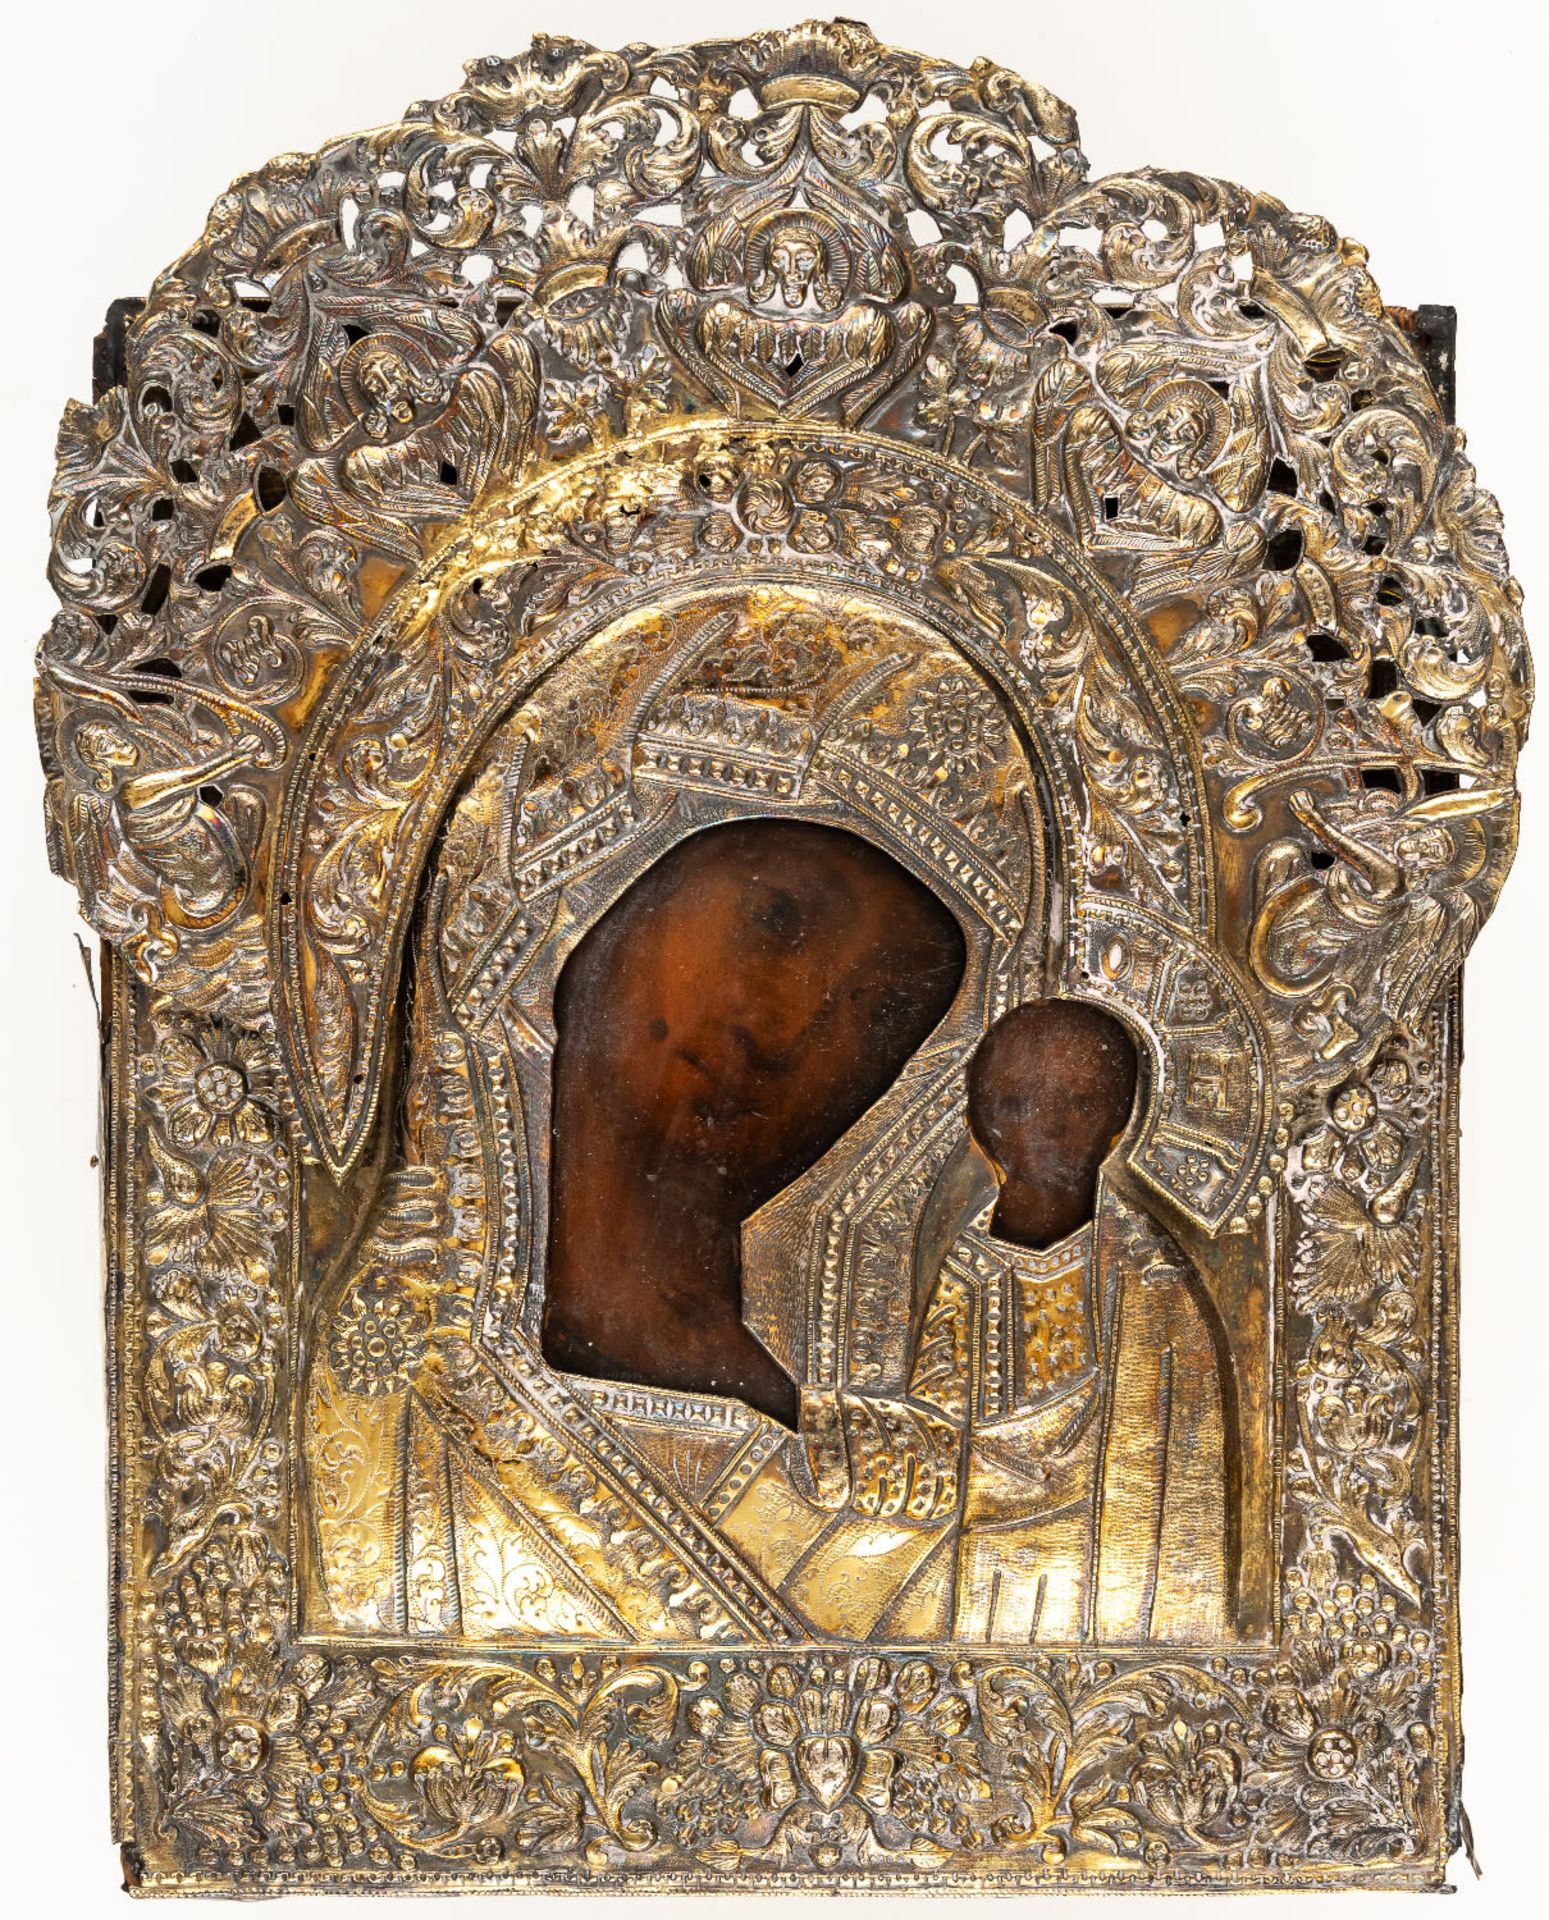 MAGNIFICENT RUSSIAN GILDED SILVER OKLAD ICON SHOWING THE MOTHER OF GOD KASANSKAYA